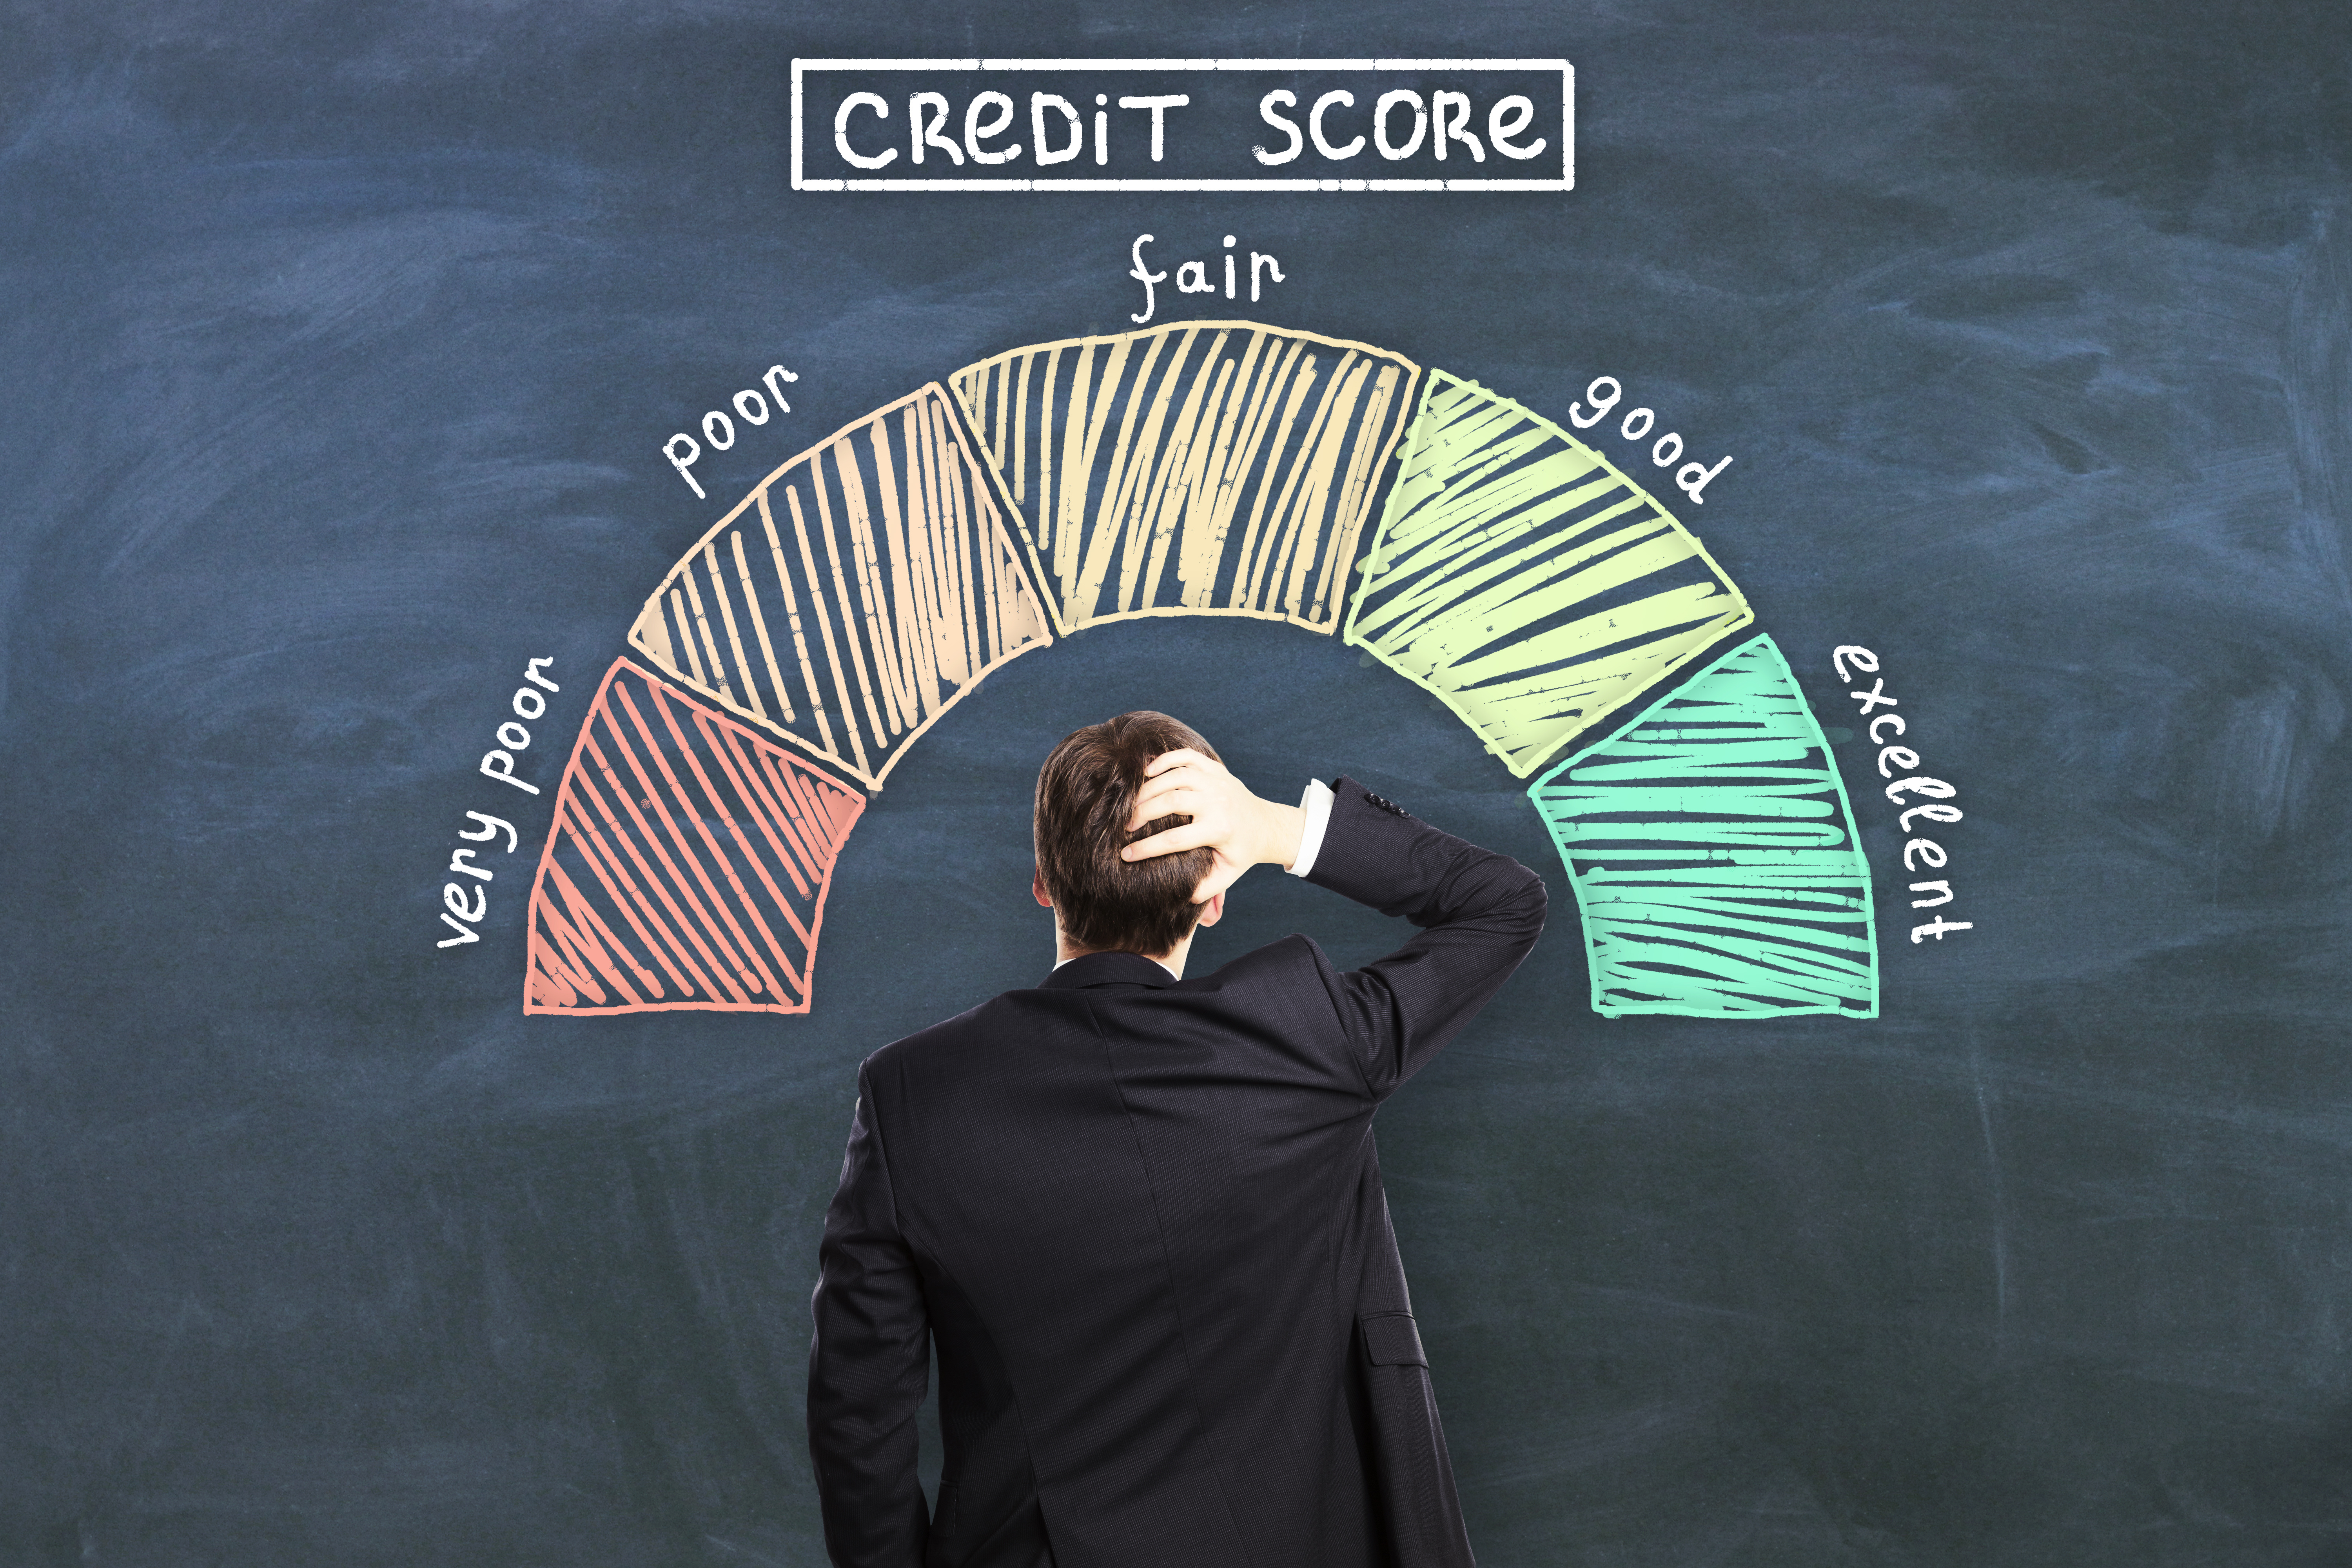 Which credit score range are you in right now? Source: Adobe Stock.